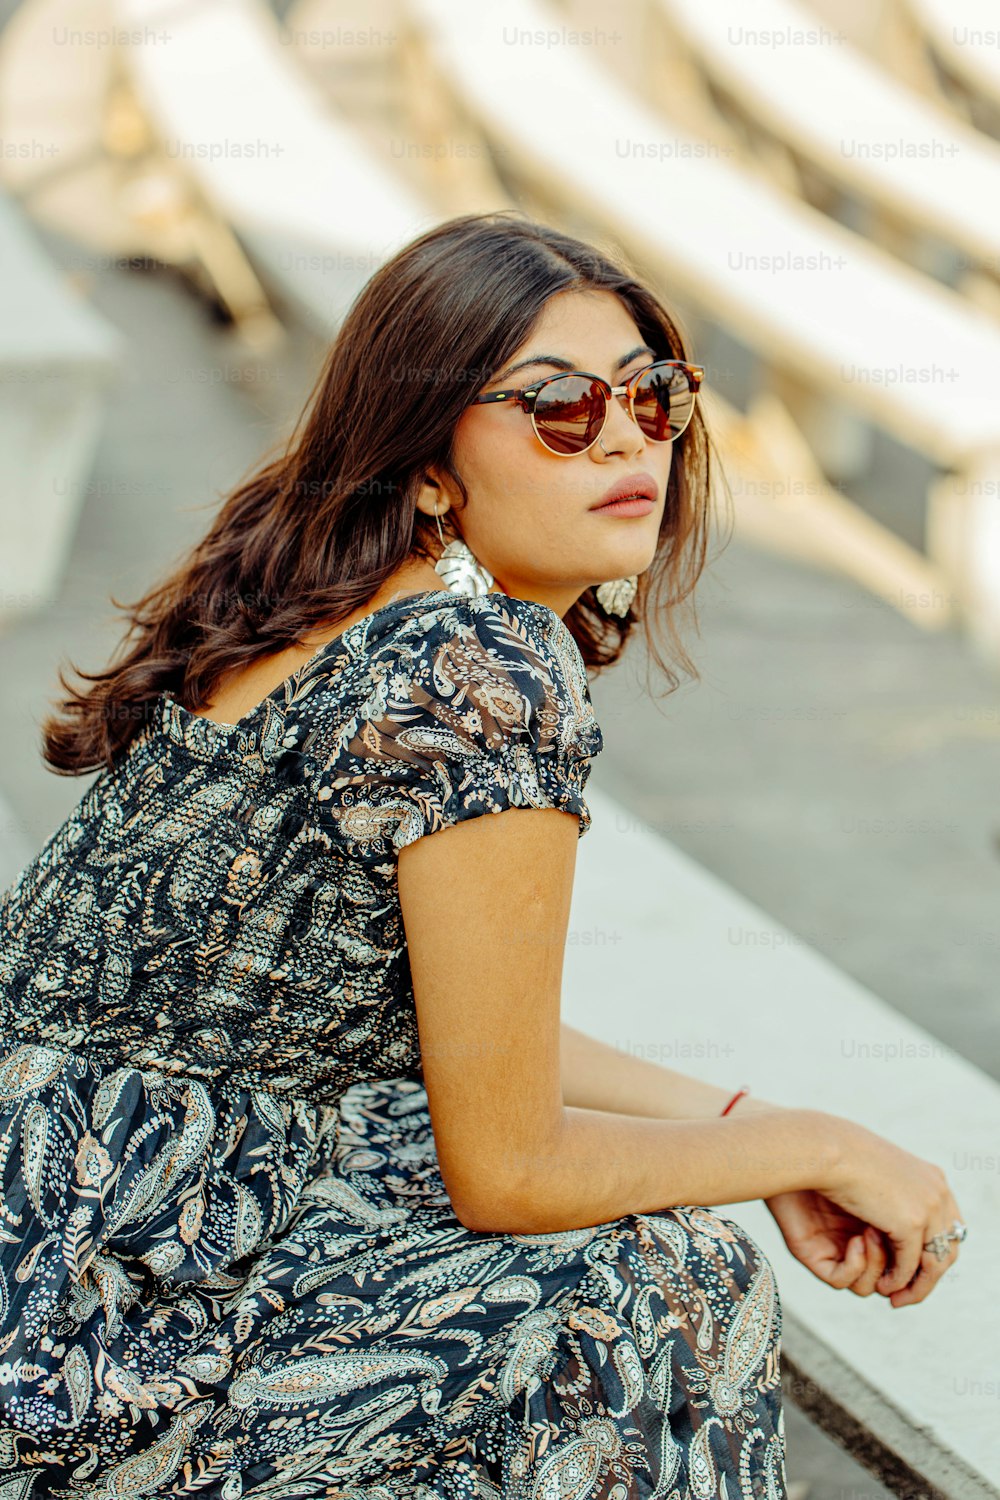 a woman sitting on a bench wearing sunglasses